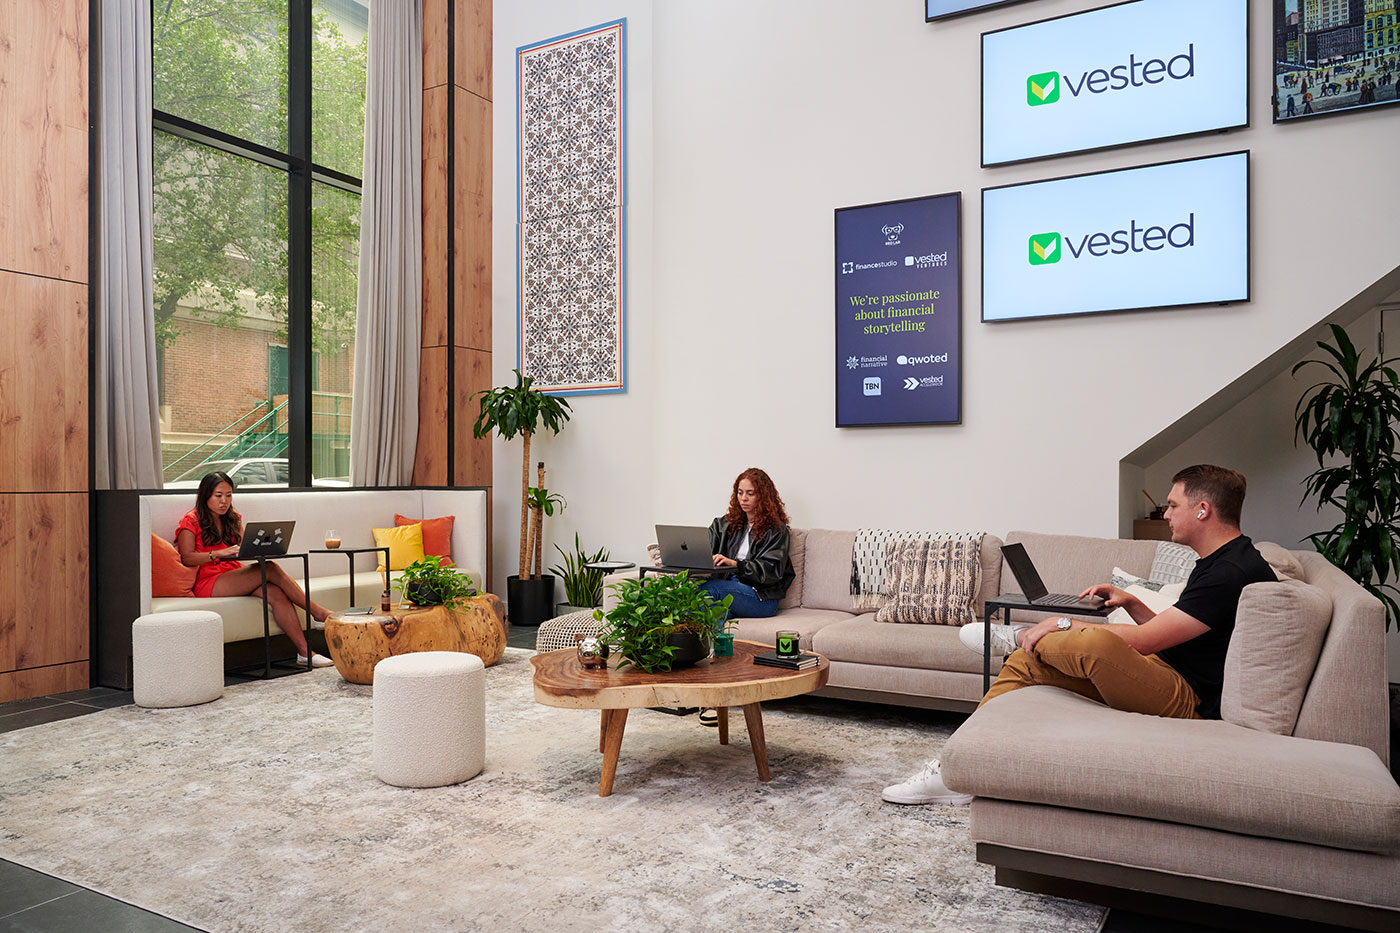 A casual seating area with comfy couches and Vested team members working.